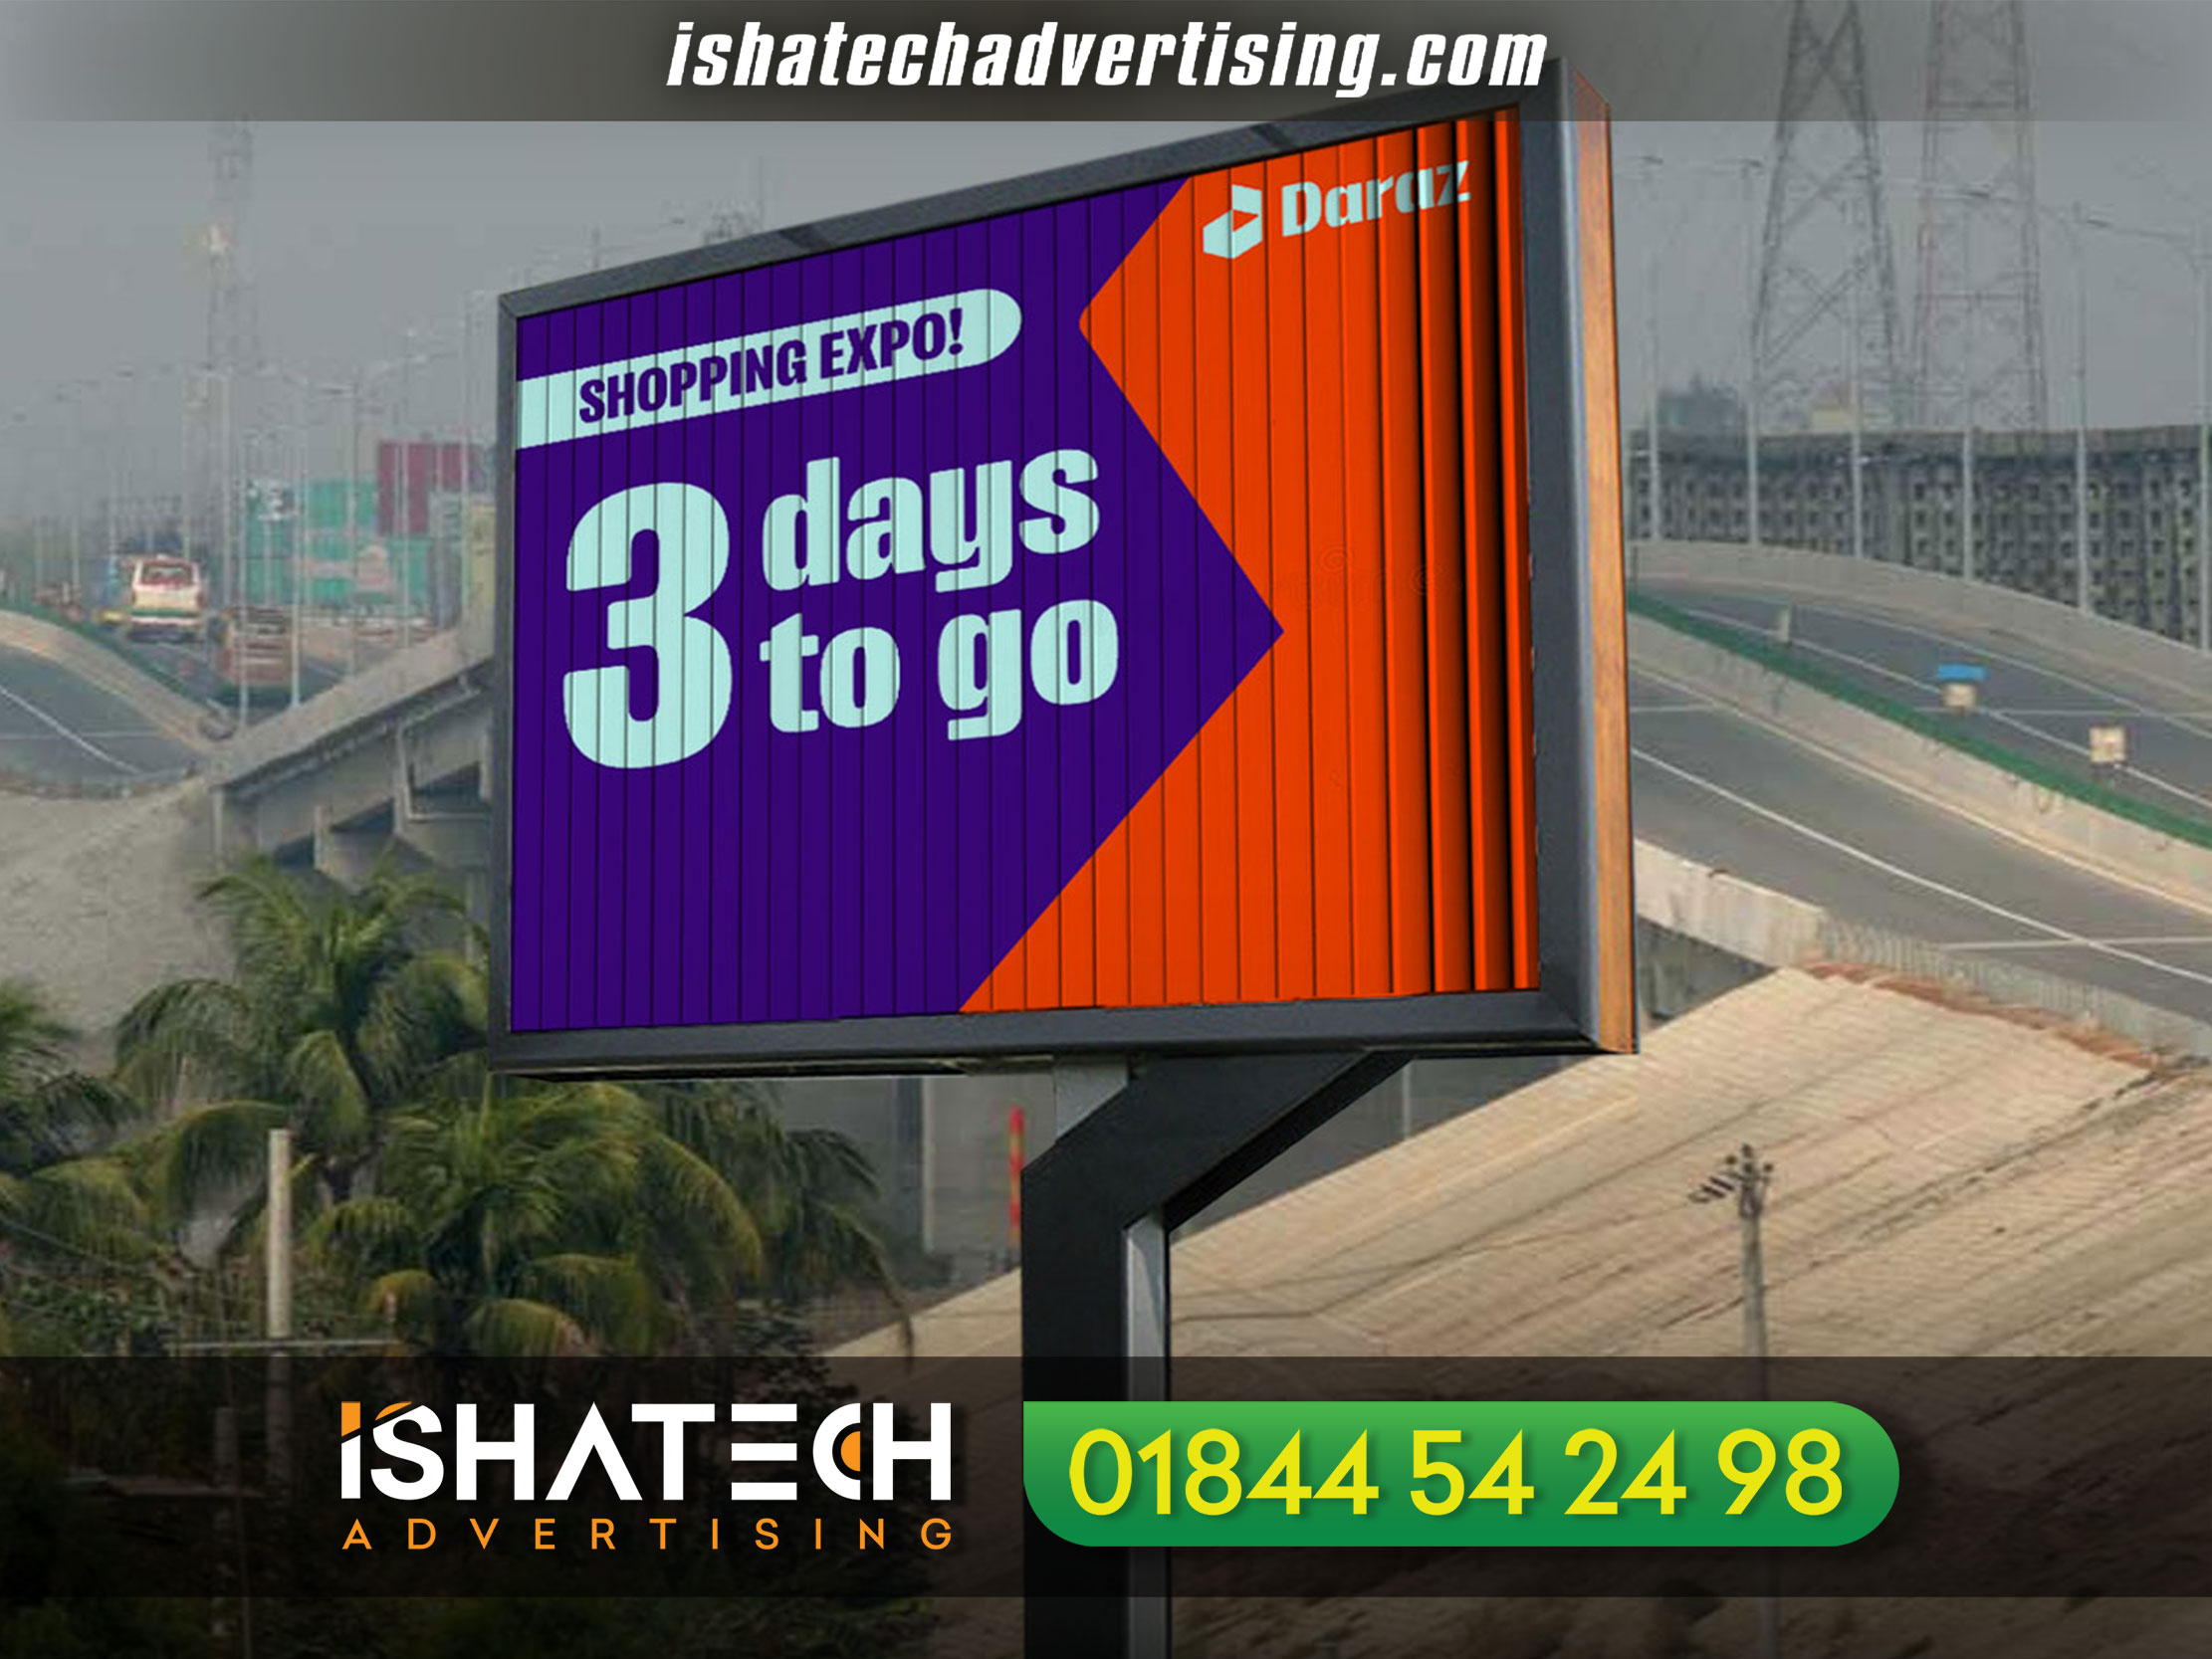 Trivision Billboard Making Dhaka Bangladesh Trivision Sign Board or Billboard| Outdoor Road Side, Trivision Sign Board Trivision Billboard & Roadside, Made-in-Bangladesh Trivision Billboard Products & Services, Trivision Sign Board & Trivision Billboard Manufacturer, Trivision Billboard Maker Company in Bangladesh - Billboard, Trivision Billboard, Billboard Making And Rental Agency in Dhaka Bangladesh, Best Trivision Billaboard Making in Dhaka Bangladesh. Trivision Sign board Trivision Billboard Roadside Trivision, Trivision Sign Board & Billboard, Billboard Making & Rent Advertising Branding in Dhaka, Advertising Trivision Billboard manufacturers & wholesalers, About - Red Rose Ad | Signboard, Billboard & Nameplate, Billboard Advertising Agency in Bangladesh. | Mirpur, Out of Home Advertising | Verde Outdoor | Billboards in Dhaka Bangladesh, Chittagong. Outdoor Medias | Billboard Rent | Billboard 2022, trivision-billboard.jpg - Bangladesh, Trivision billboard hi-res stock photography and images, Outdoor Large Roadside Advertising Three Sided Tri-vision. trivision billboard cost. billboard advertising in bangladesh. digital billboard price in bangladesh. billboard cost in bangladesh. *trivision billboard making dhaka bangladesh.